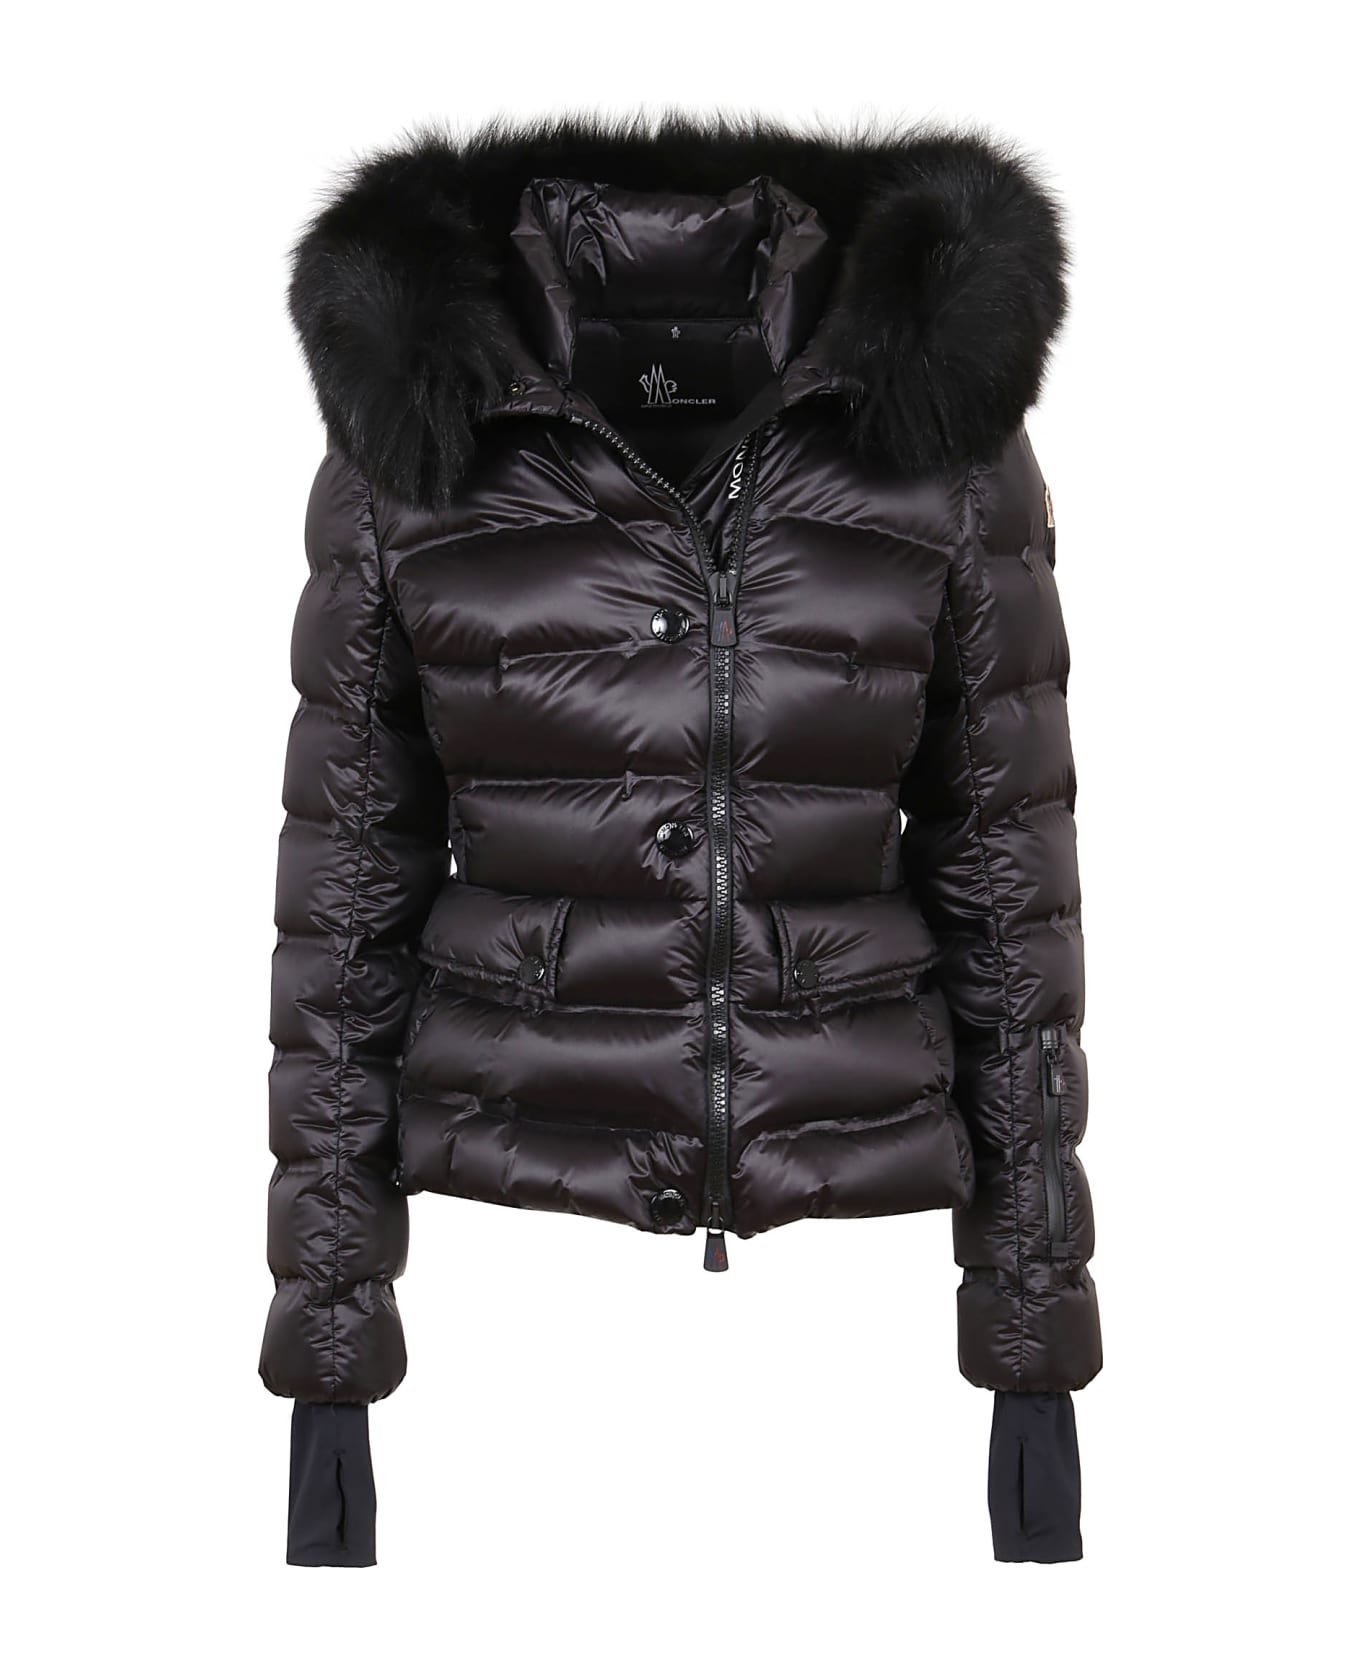 Moncler Black Technical Fabric Padded Jacket | italist